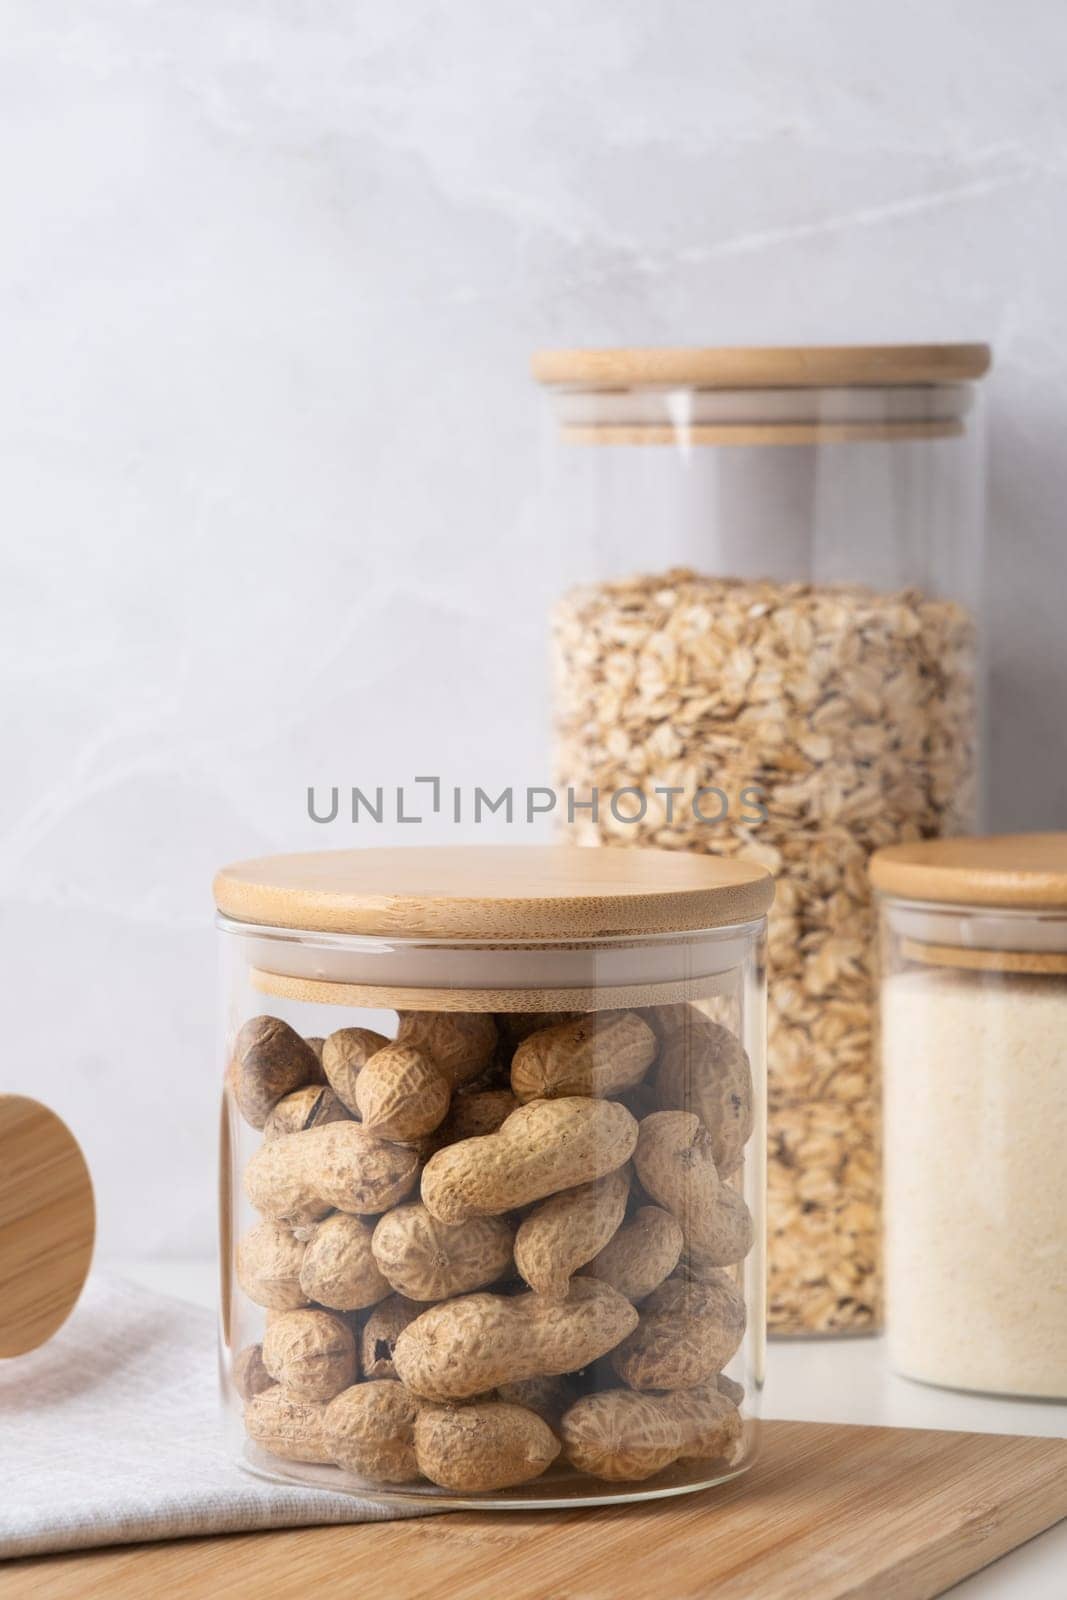 Reusing Glass Jars To Store Dried Food Living Sustainable Lifestyle At Home by Desperada